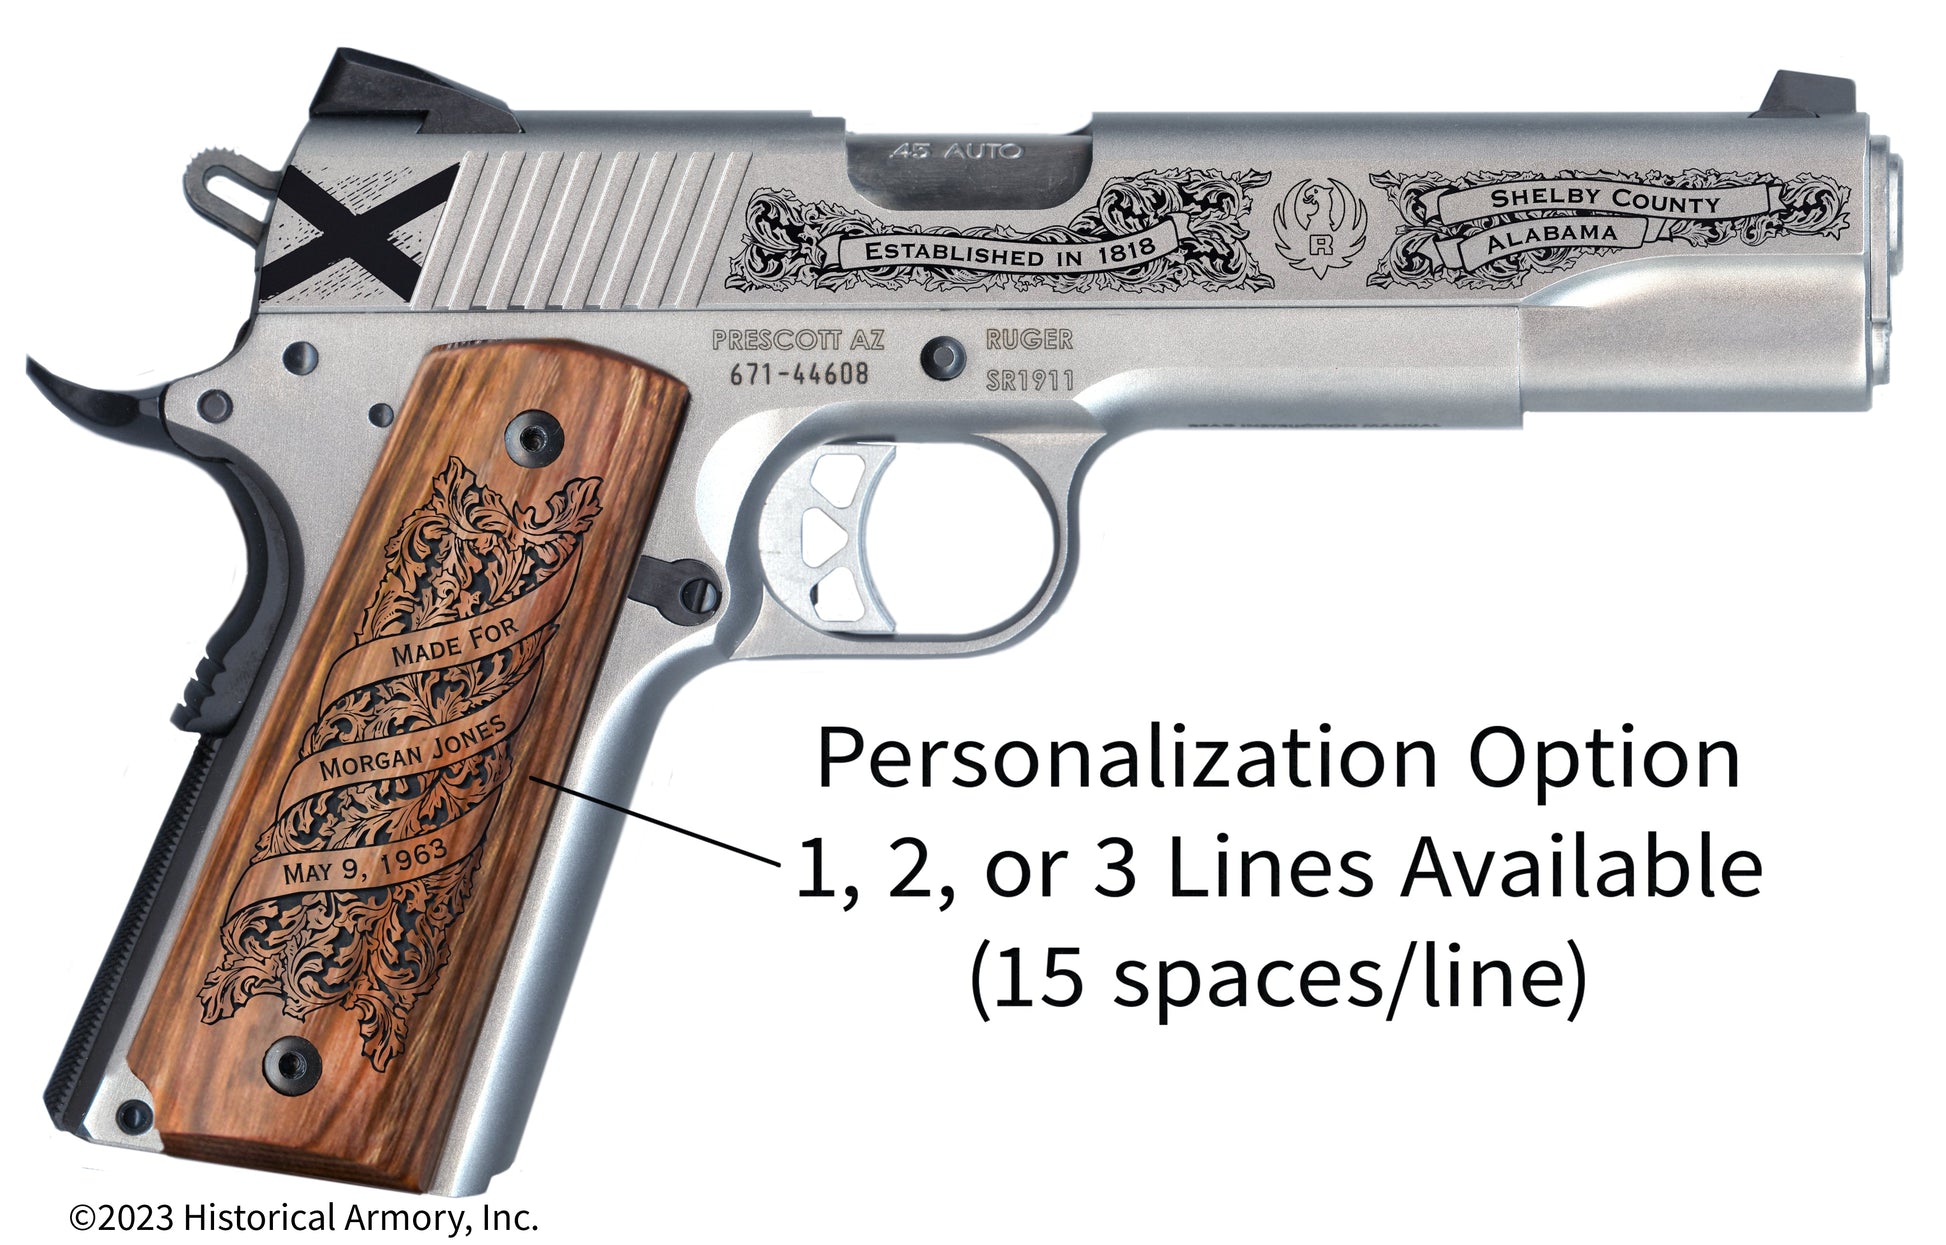 Shelby County Alabama Personalized Engraved .45 Auto Ruger 1911